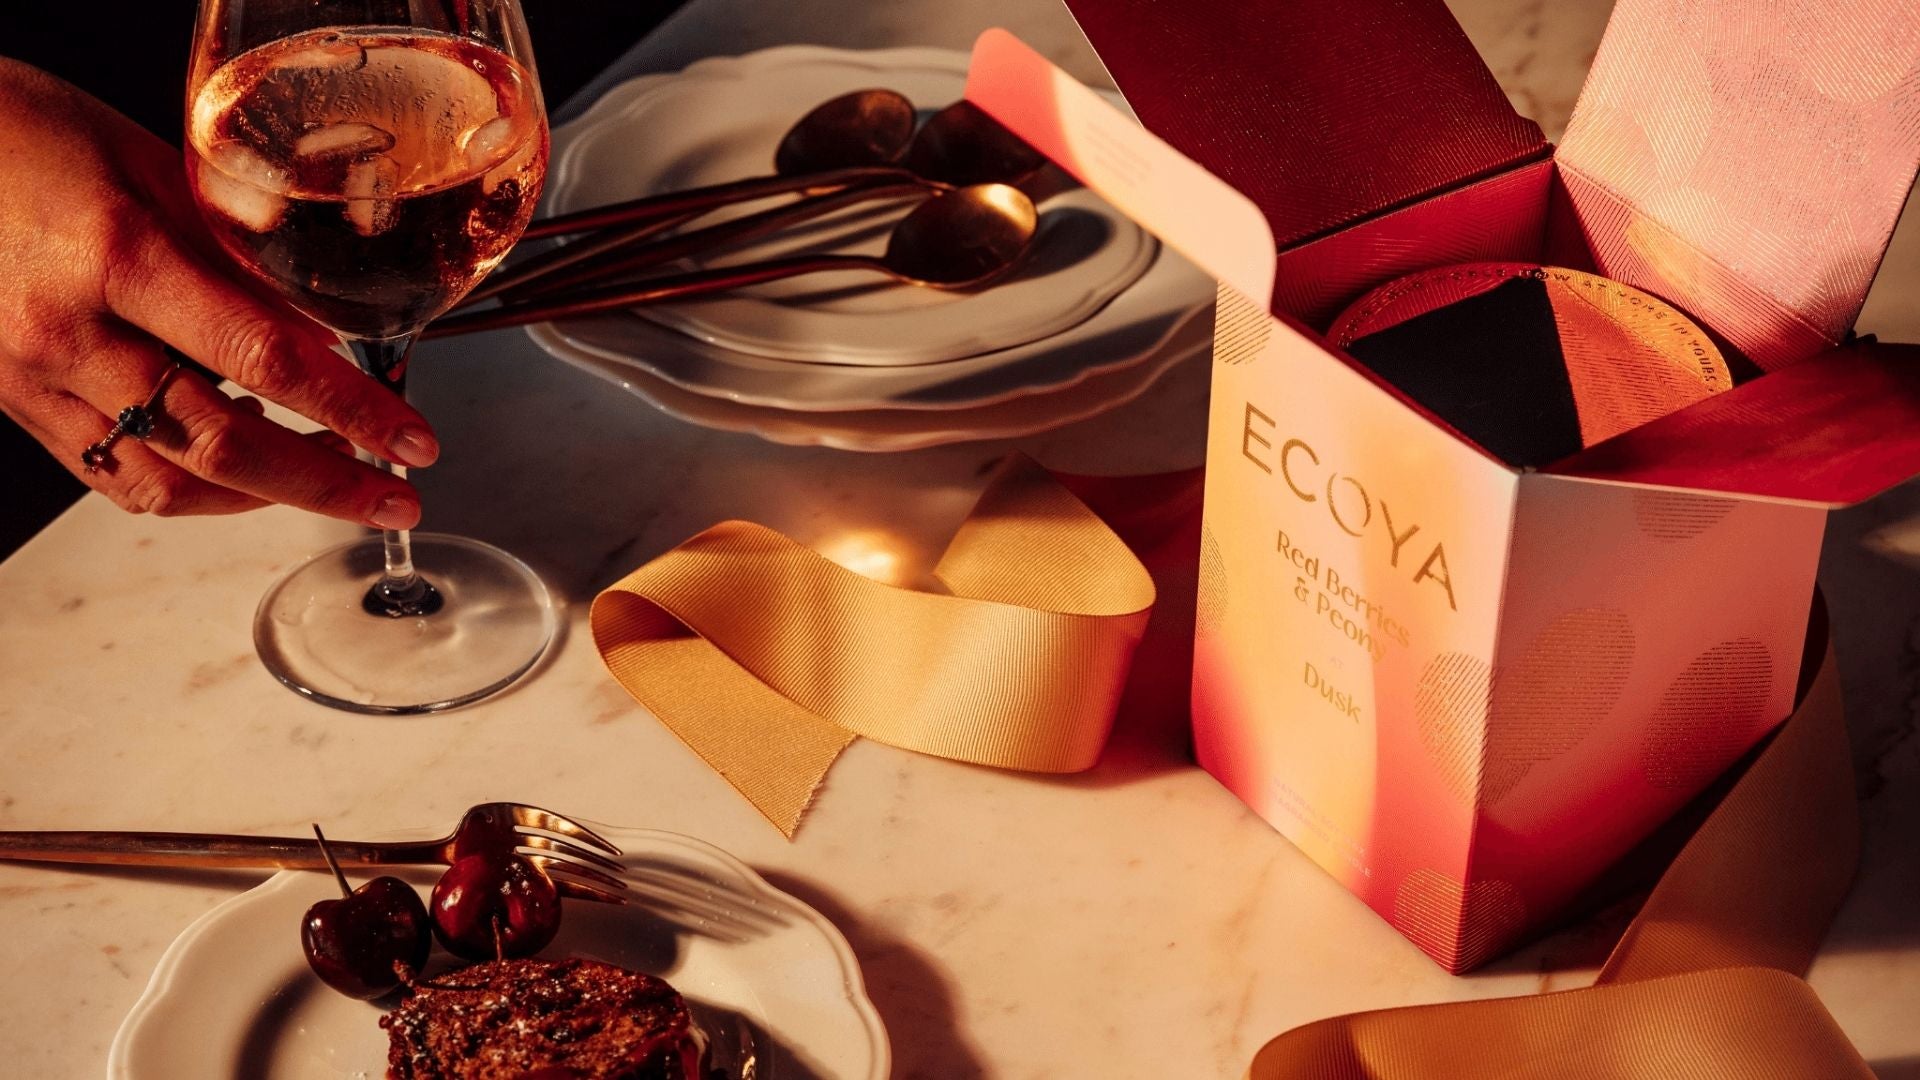 Ecoya Christmas scented candles